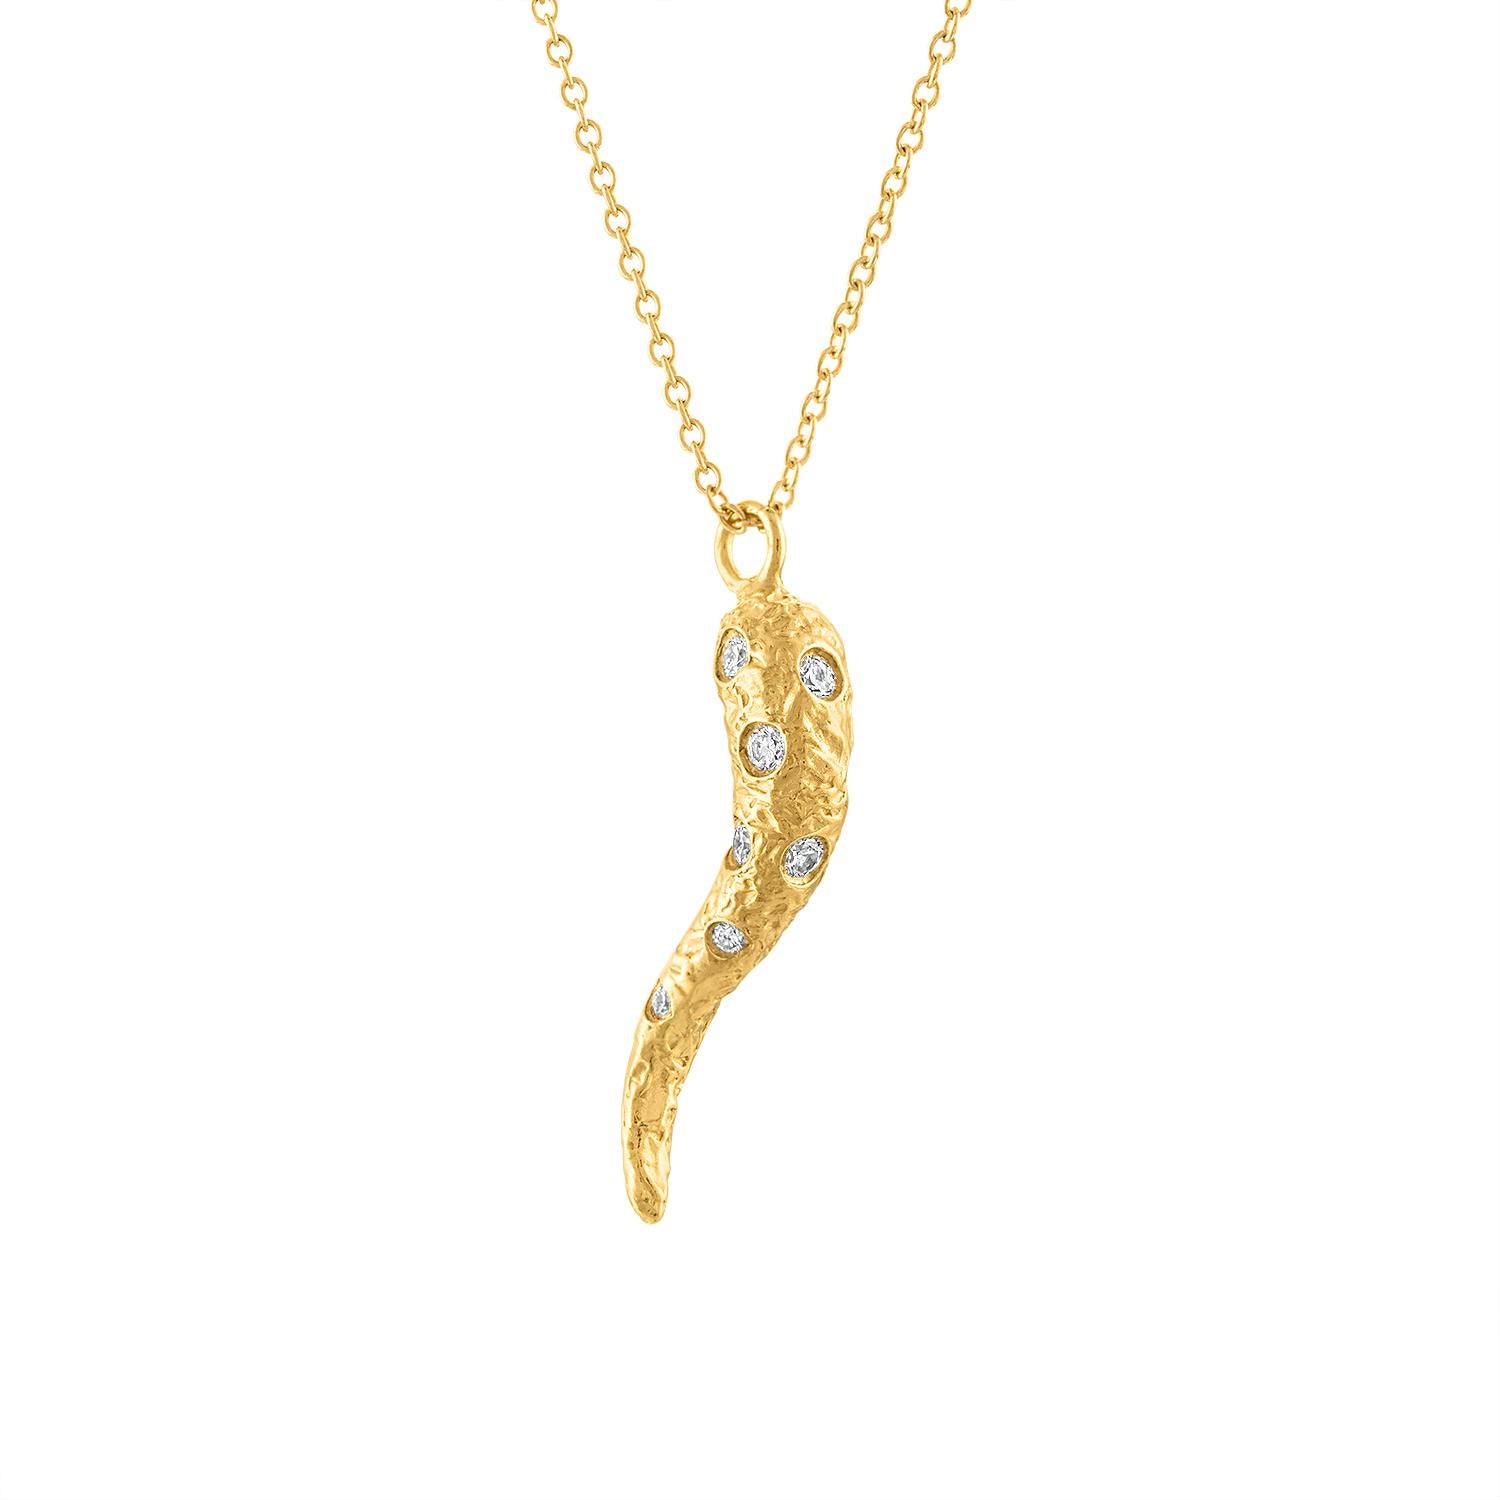 This diamond Cornicello Necklace (or Italian Horn) is a stunning piece that combines modern design with timeless elegance. The necklace features a Cornicello adorned with diamonds scattered throughout creating a look that is both eye catching and